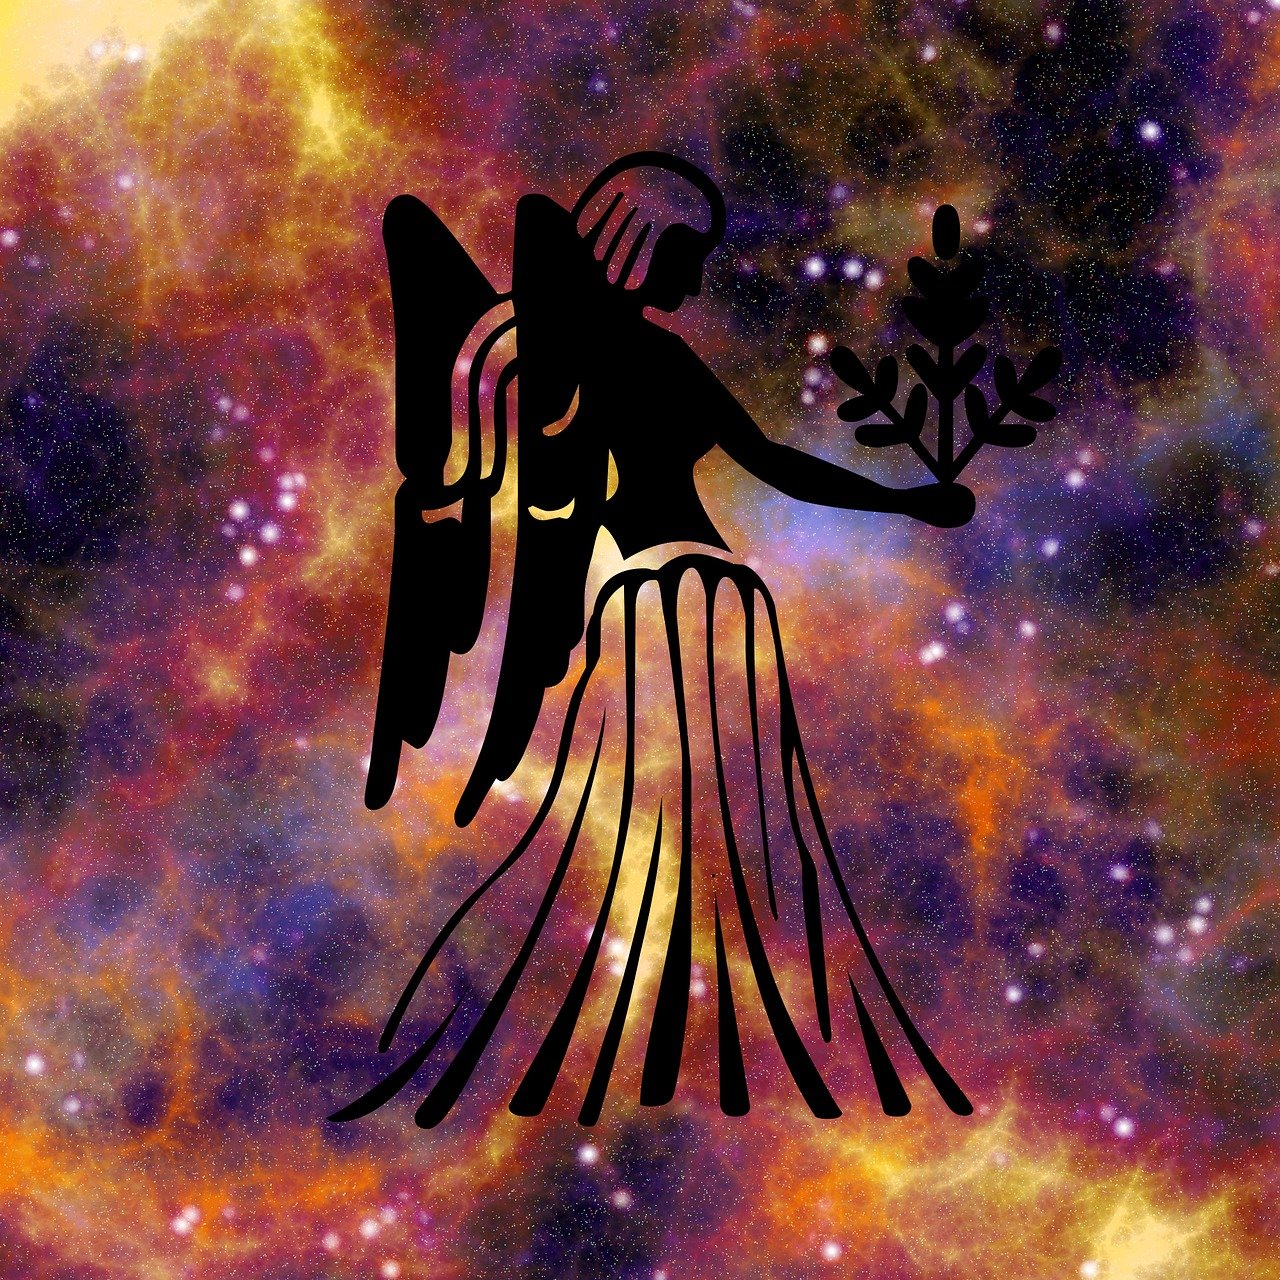 a painting of an angel holding a flower, a digital rendering, inspired by Xul Solar, art nouveau, on a galaxy looking background, single silhouette figure, greek titan goddess themis, mercury dress